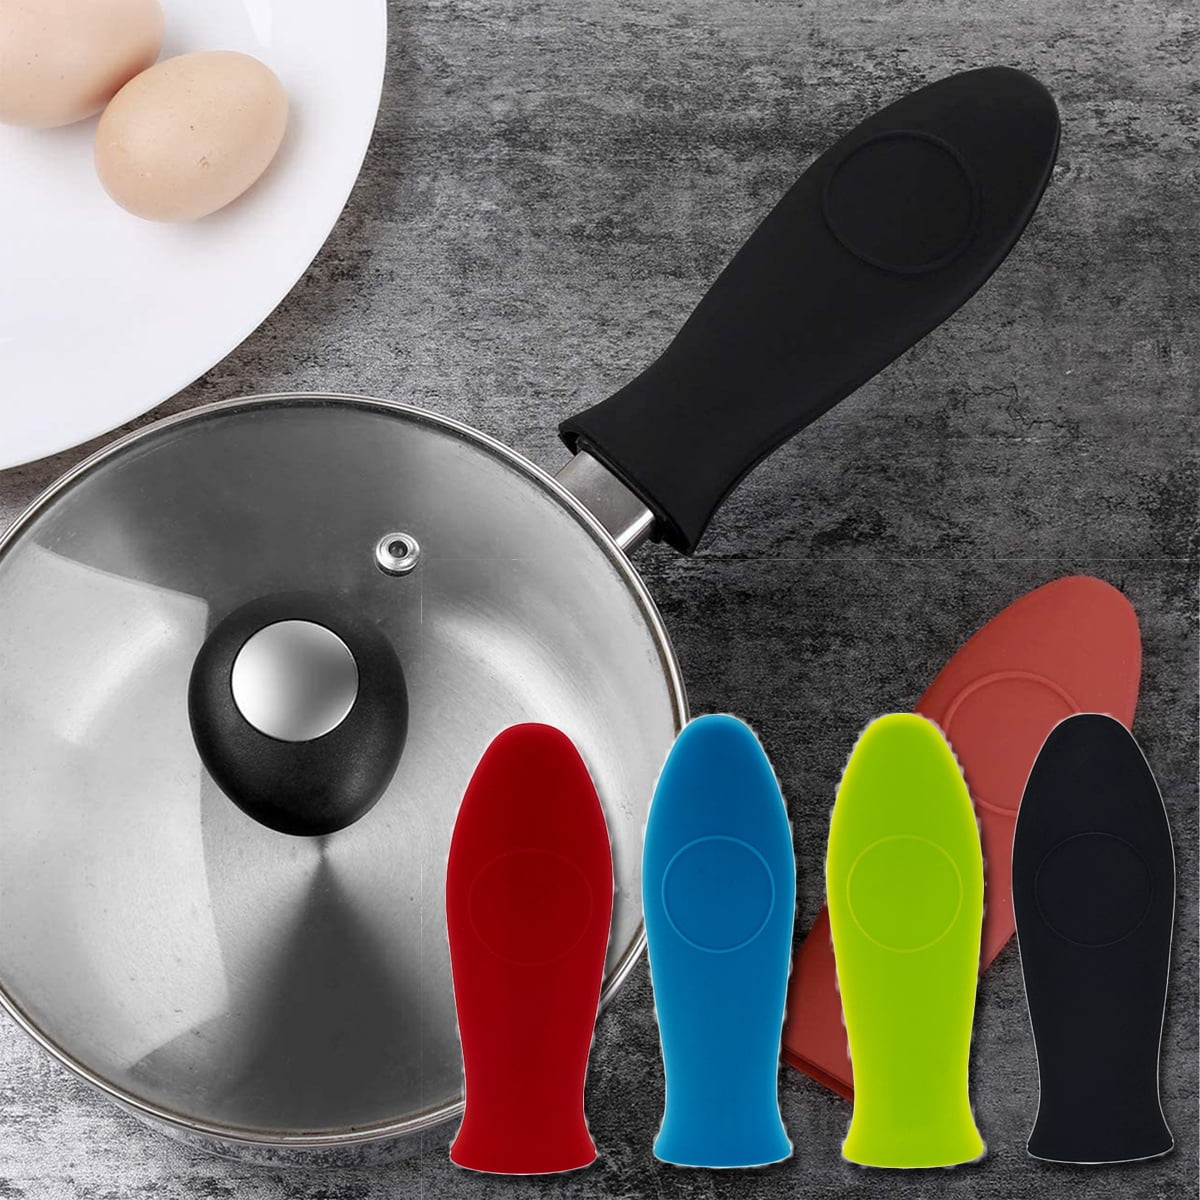 Webake Silicone Hot Handle Cover Holder Sleeve for Cast Iron